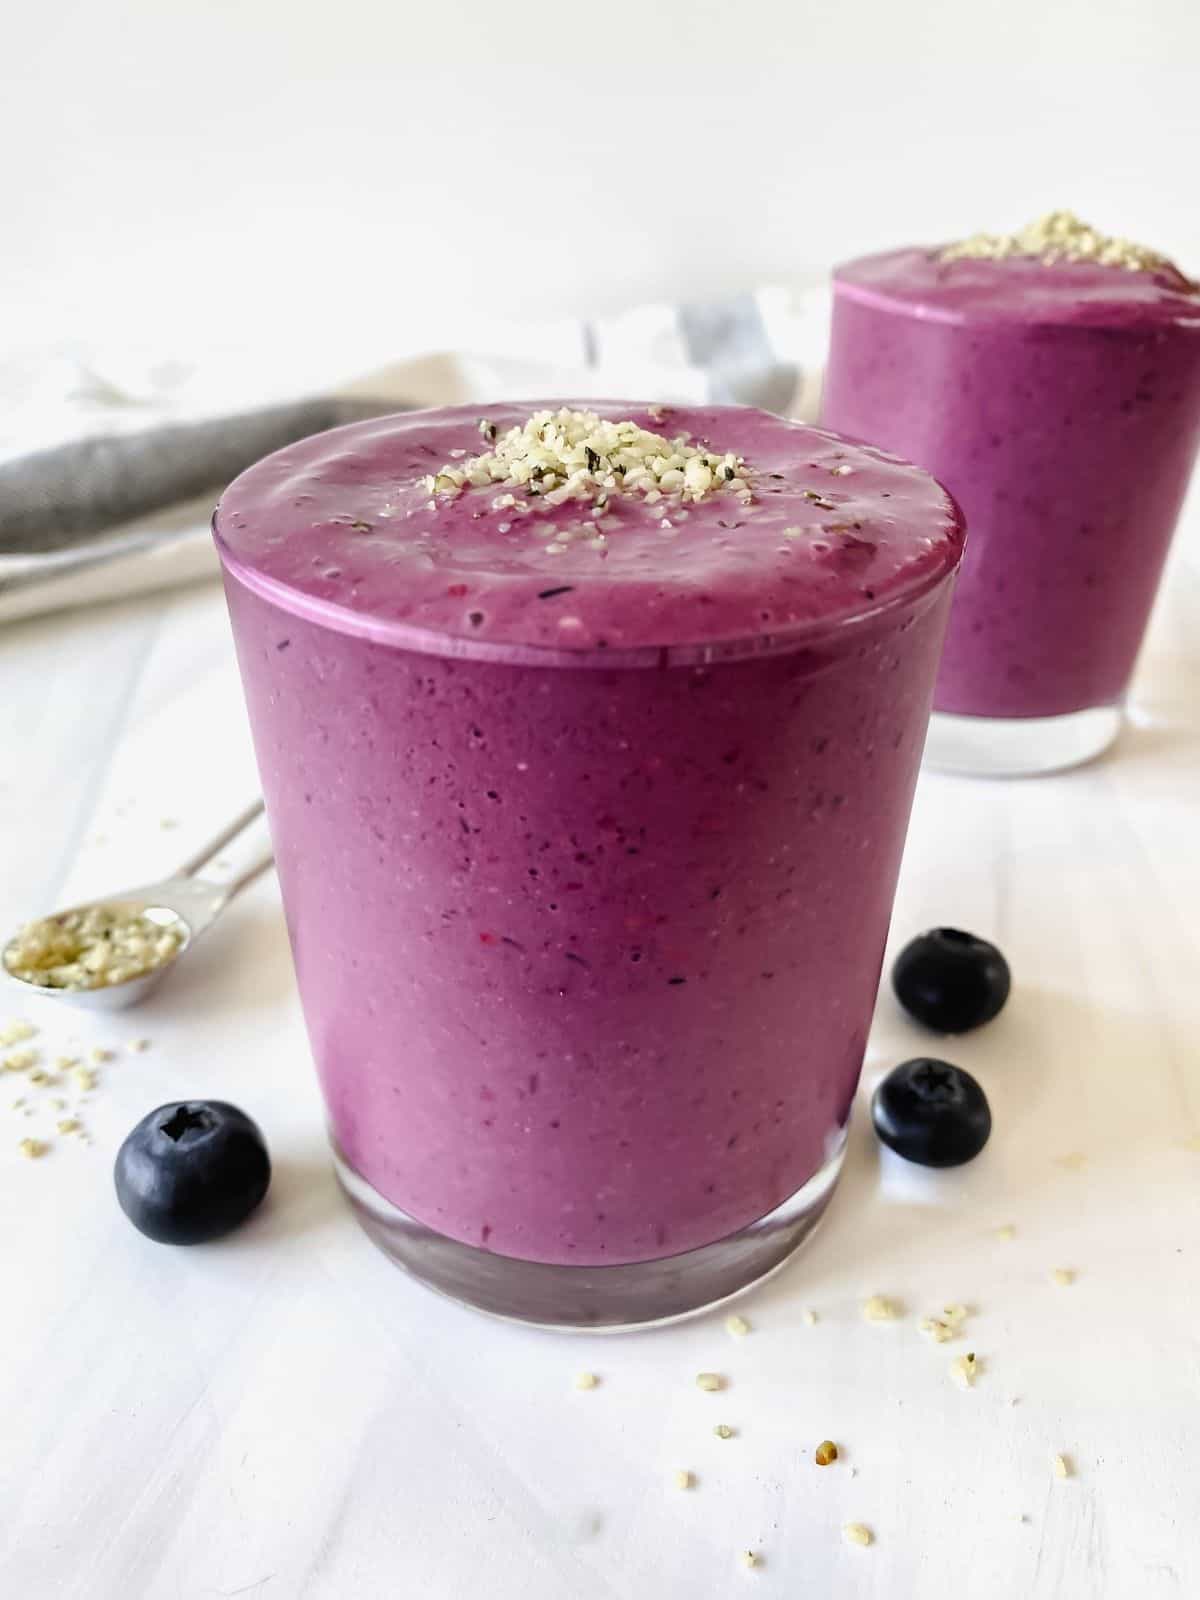 mixed blueberry blackberry smoothie in two glasses next to blueberries and a spoonful of hemp seeds.